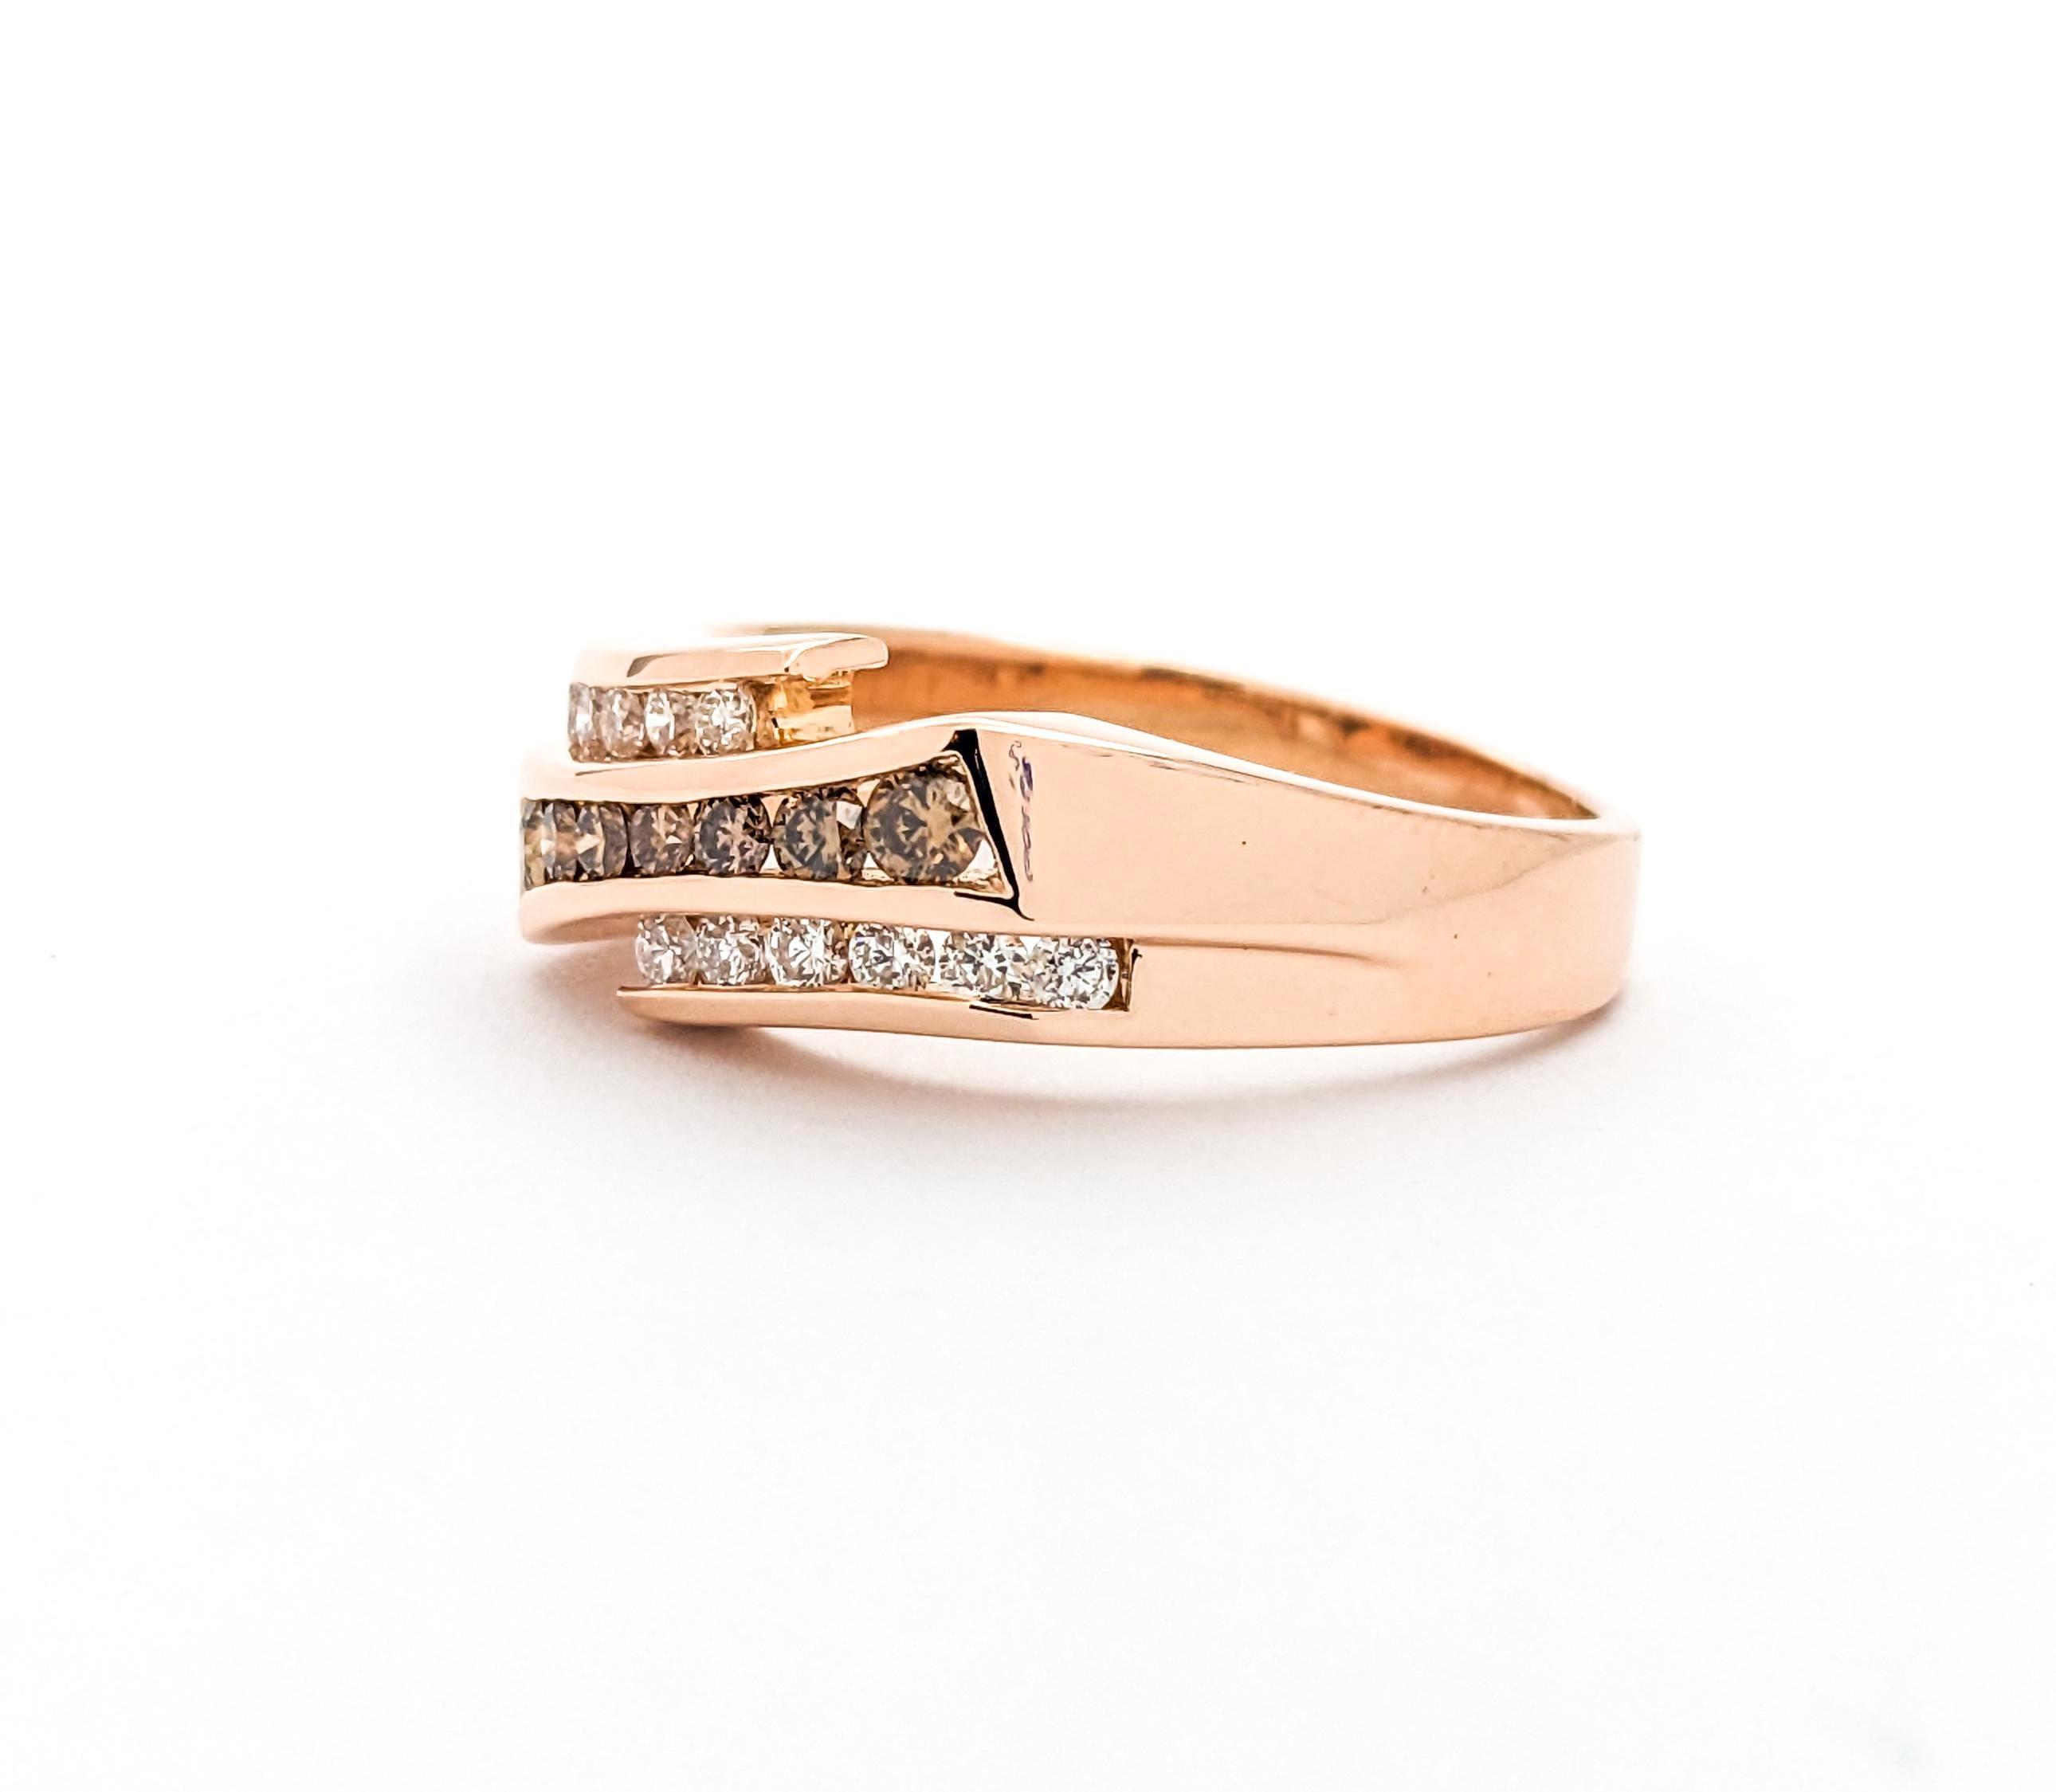 .50ctw Diamond 3-Row Channel Set Design Ring In Rose Gold

Discover the stunning allure of our Diamond Fashion Ring, beautifully crafted in 14kt rose gold. This exquisite ring features .50ctw of round diamonds in a unique 3-row channel set design.